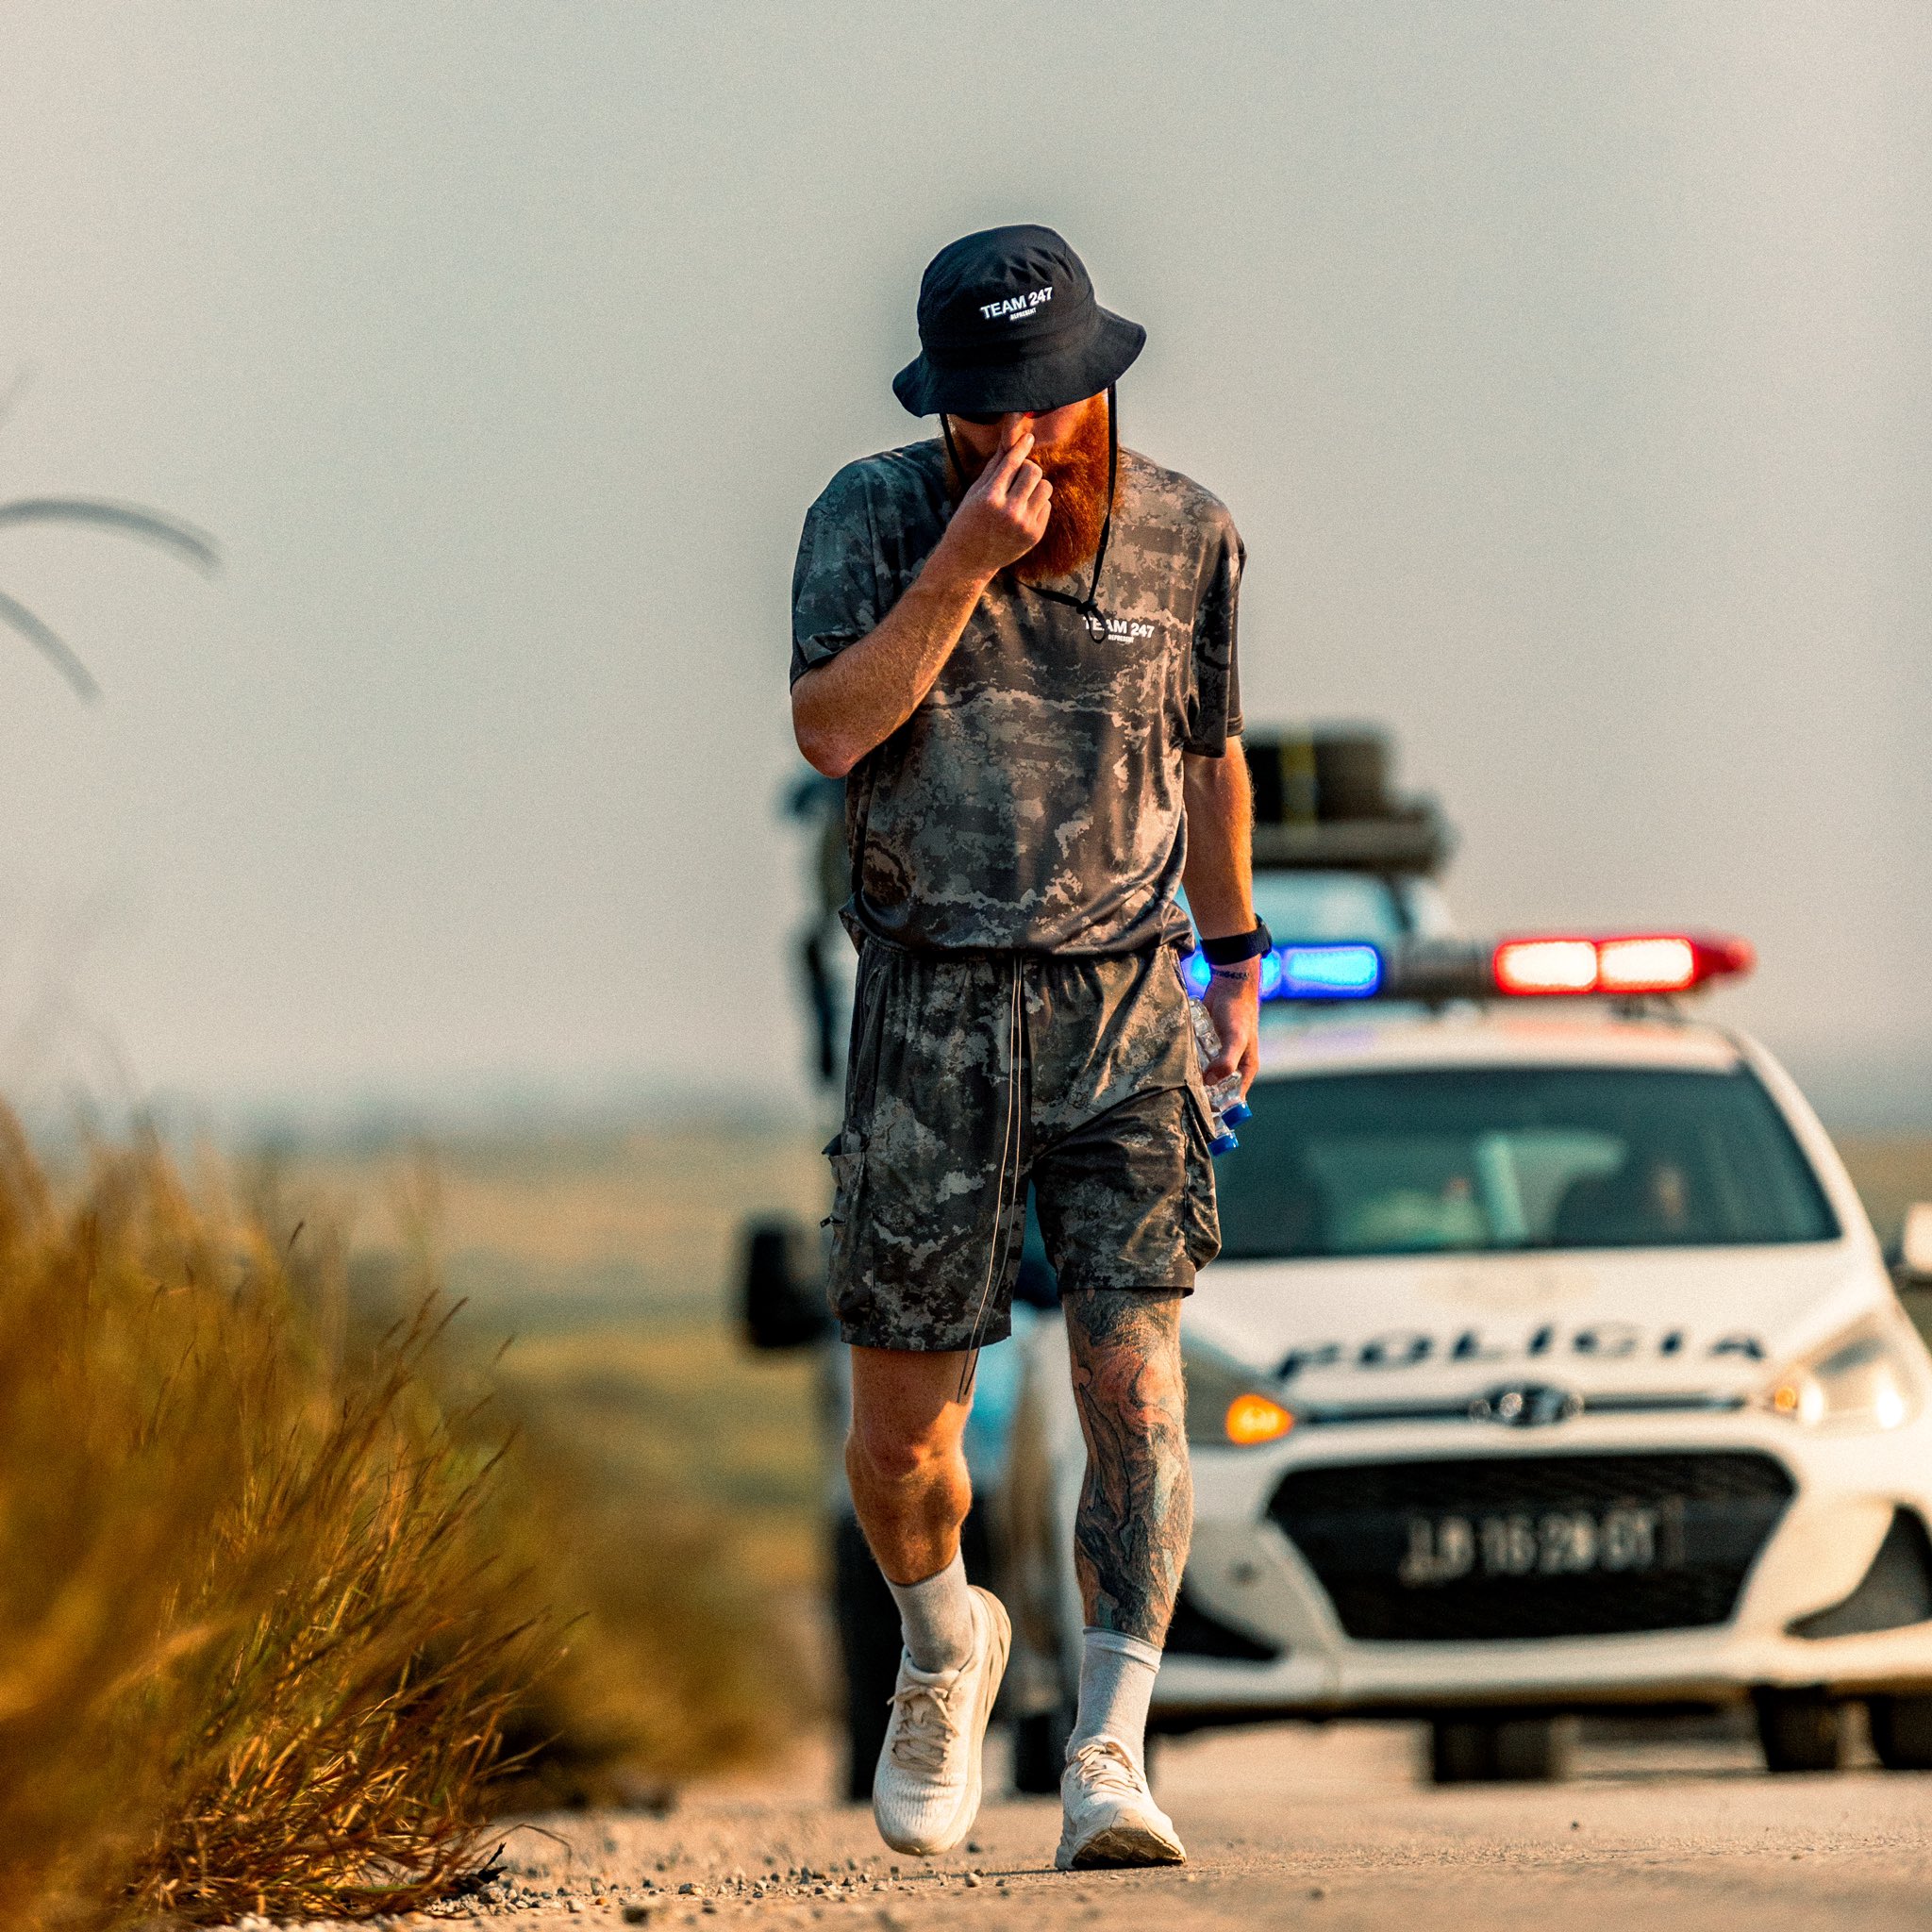 Russell Cook running alongside police car